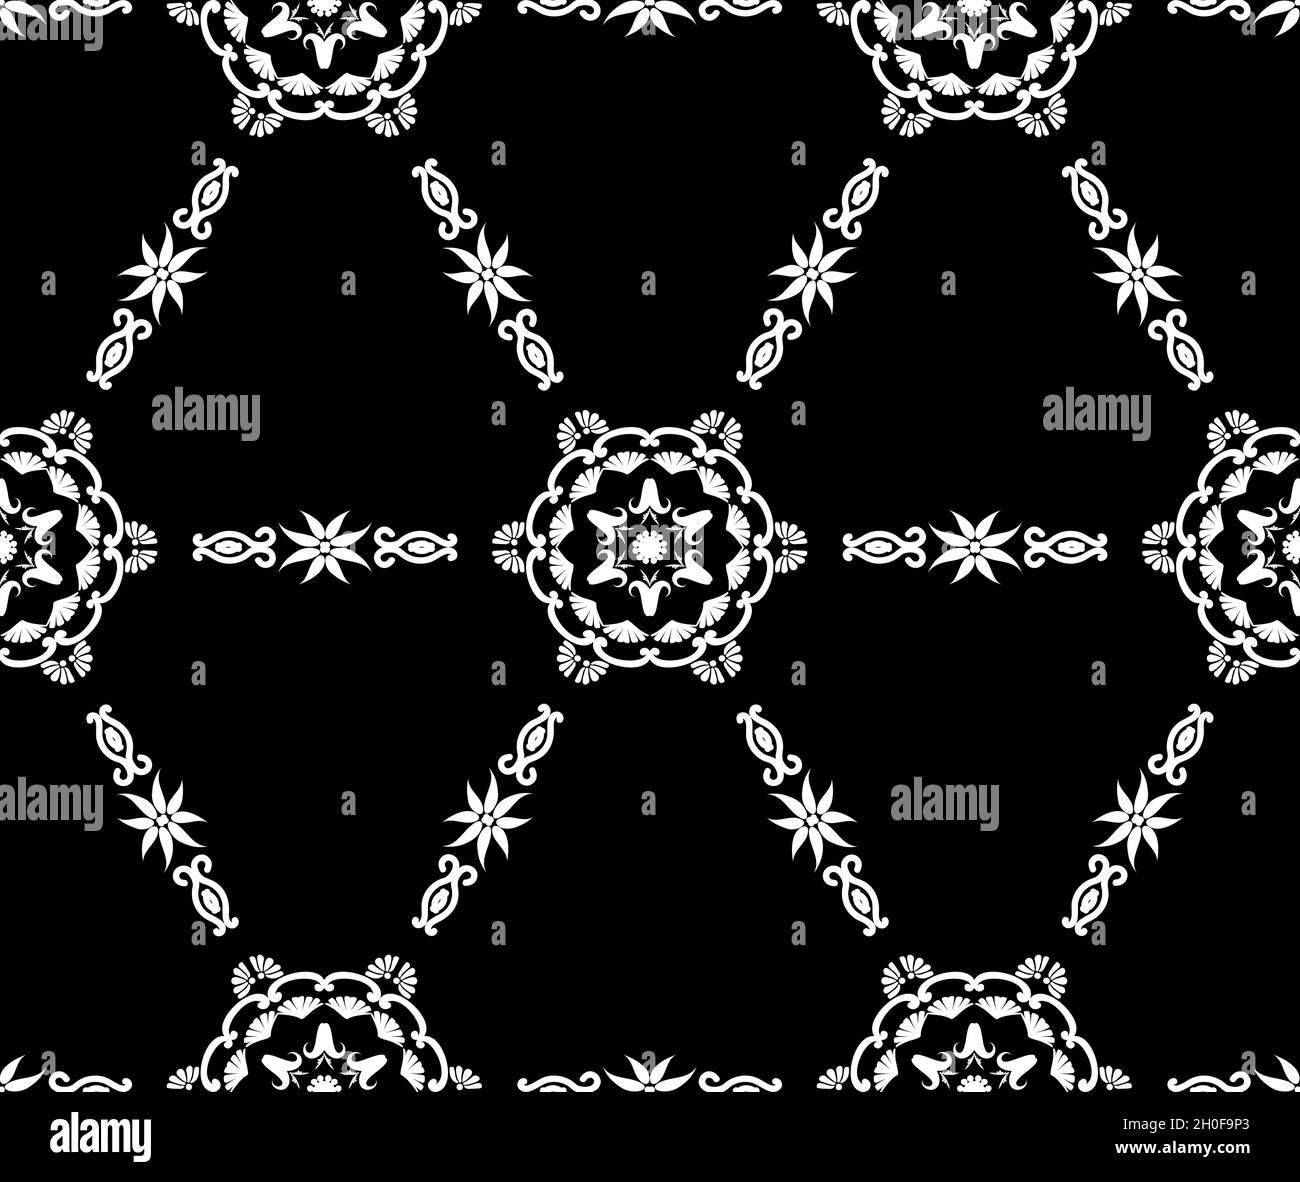 Geometric tiled pattern with ornament. Arabic ethnic seamless background. Decorative texture. Black and white. For fabric, wallpaper, venetian pattern Stock Vector